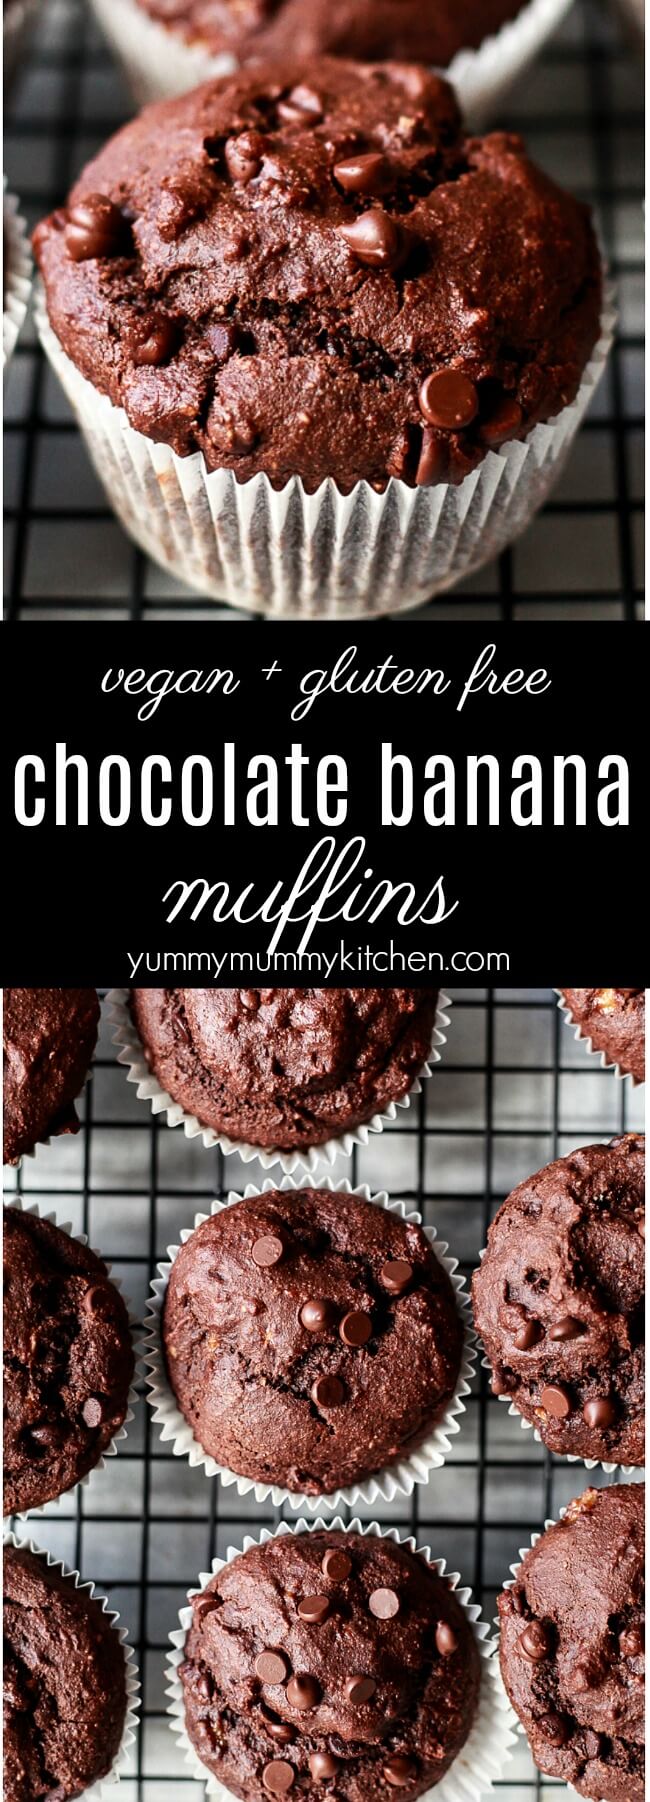 The best vegan gluten free chocolate banana muffins made with healthier ingredients like almond flour and oat flour. These easy chocolate muffins are sweetened naturally with bananas and maple syrup. Chocolate banana muffins make a delicious breakfast, brunch, after school snack, or dessert. 